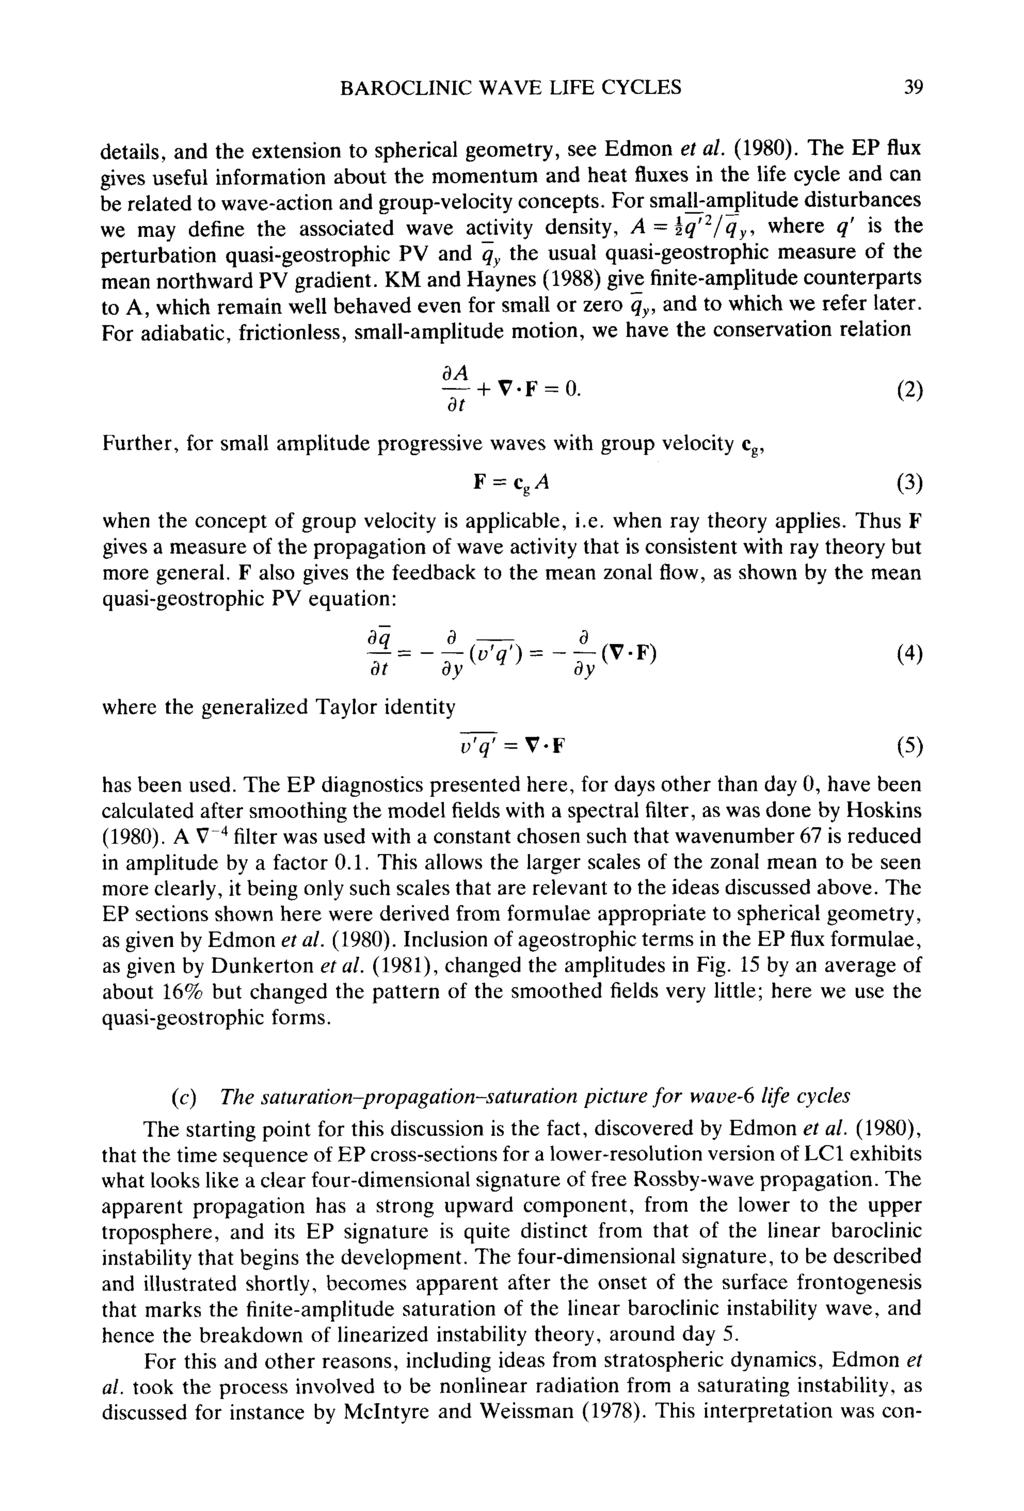 BAROCLINIC WAVE LIFE CYCLES 39 details, and the extension to spherical geometry, see Edmon et al. (1980).